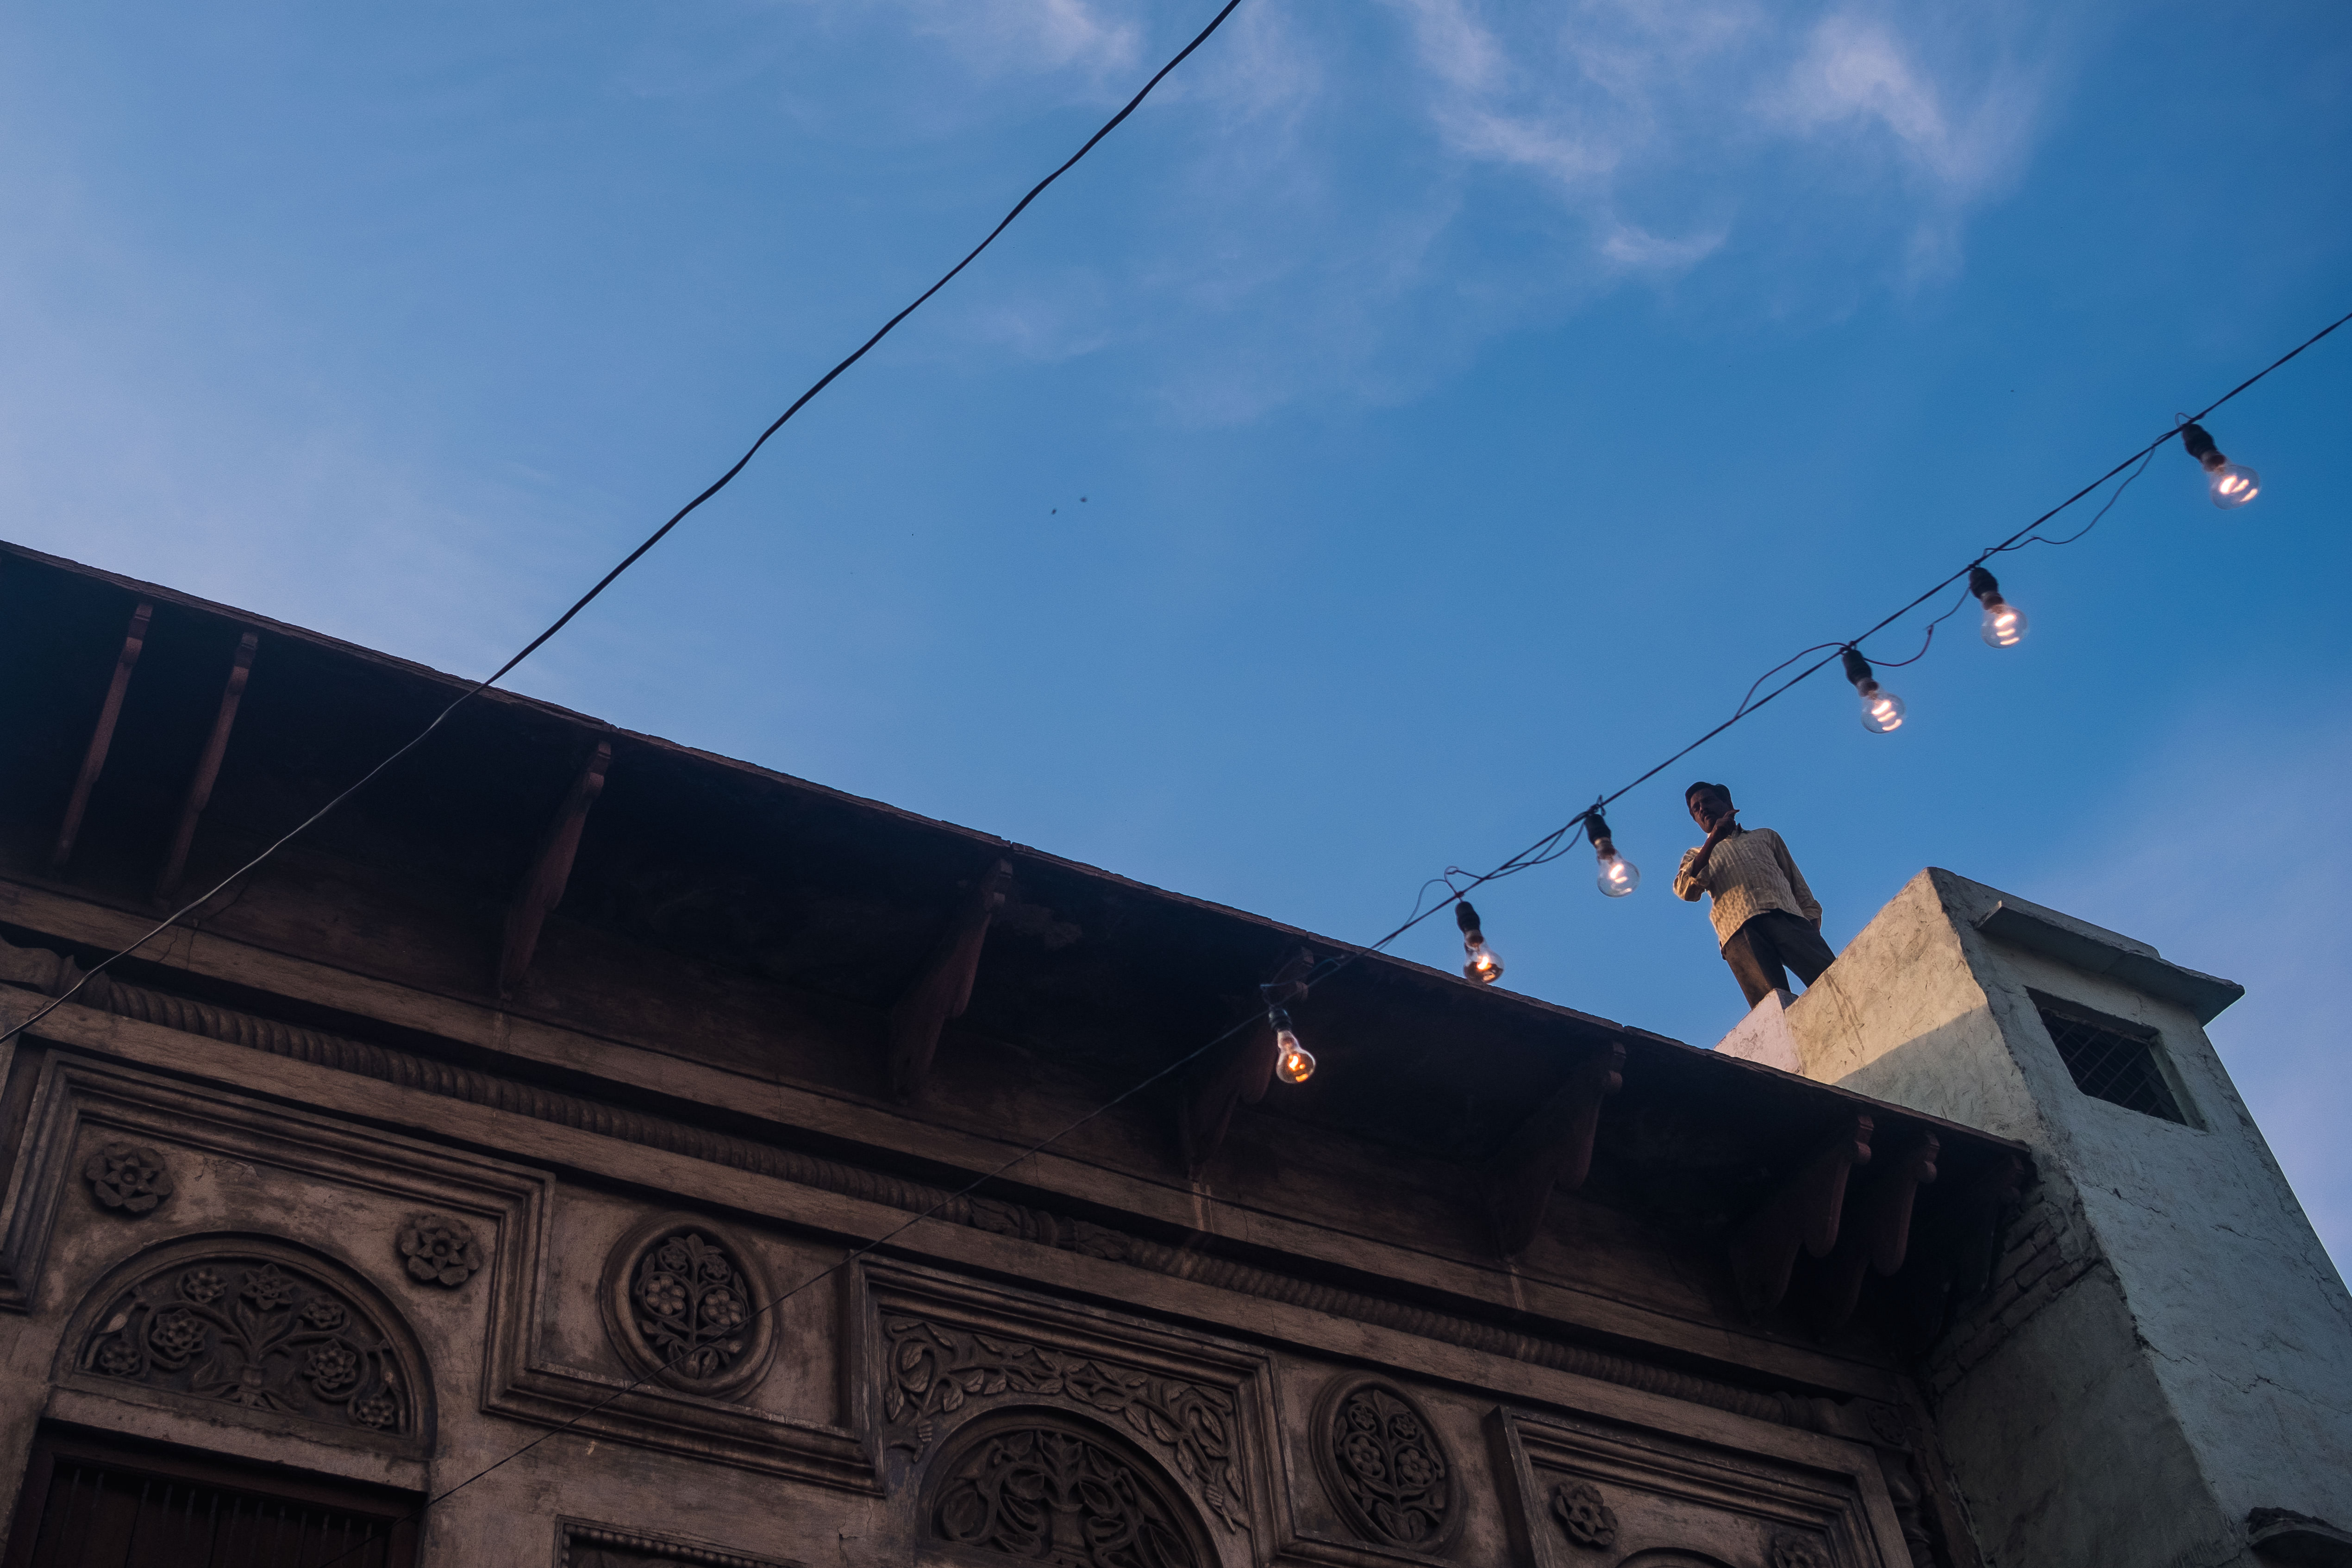 India Street Photography During Holi Festival. man stand on the roof between string lights. Images by Jason Vinson